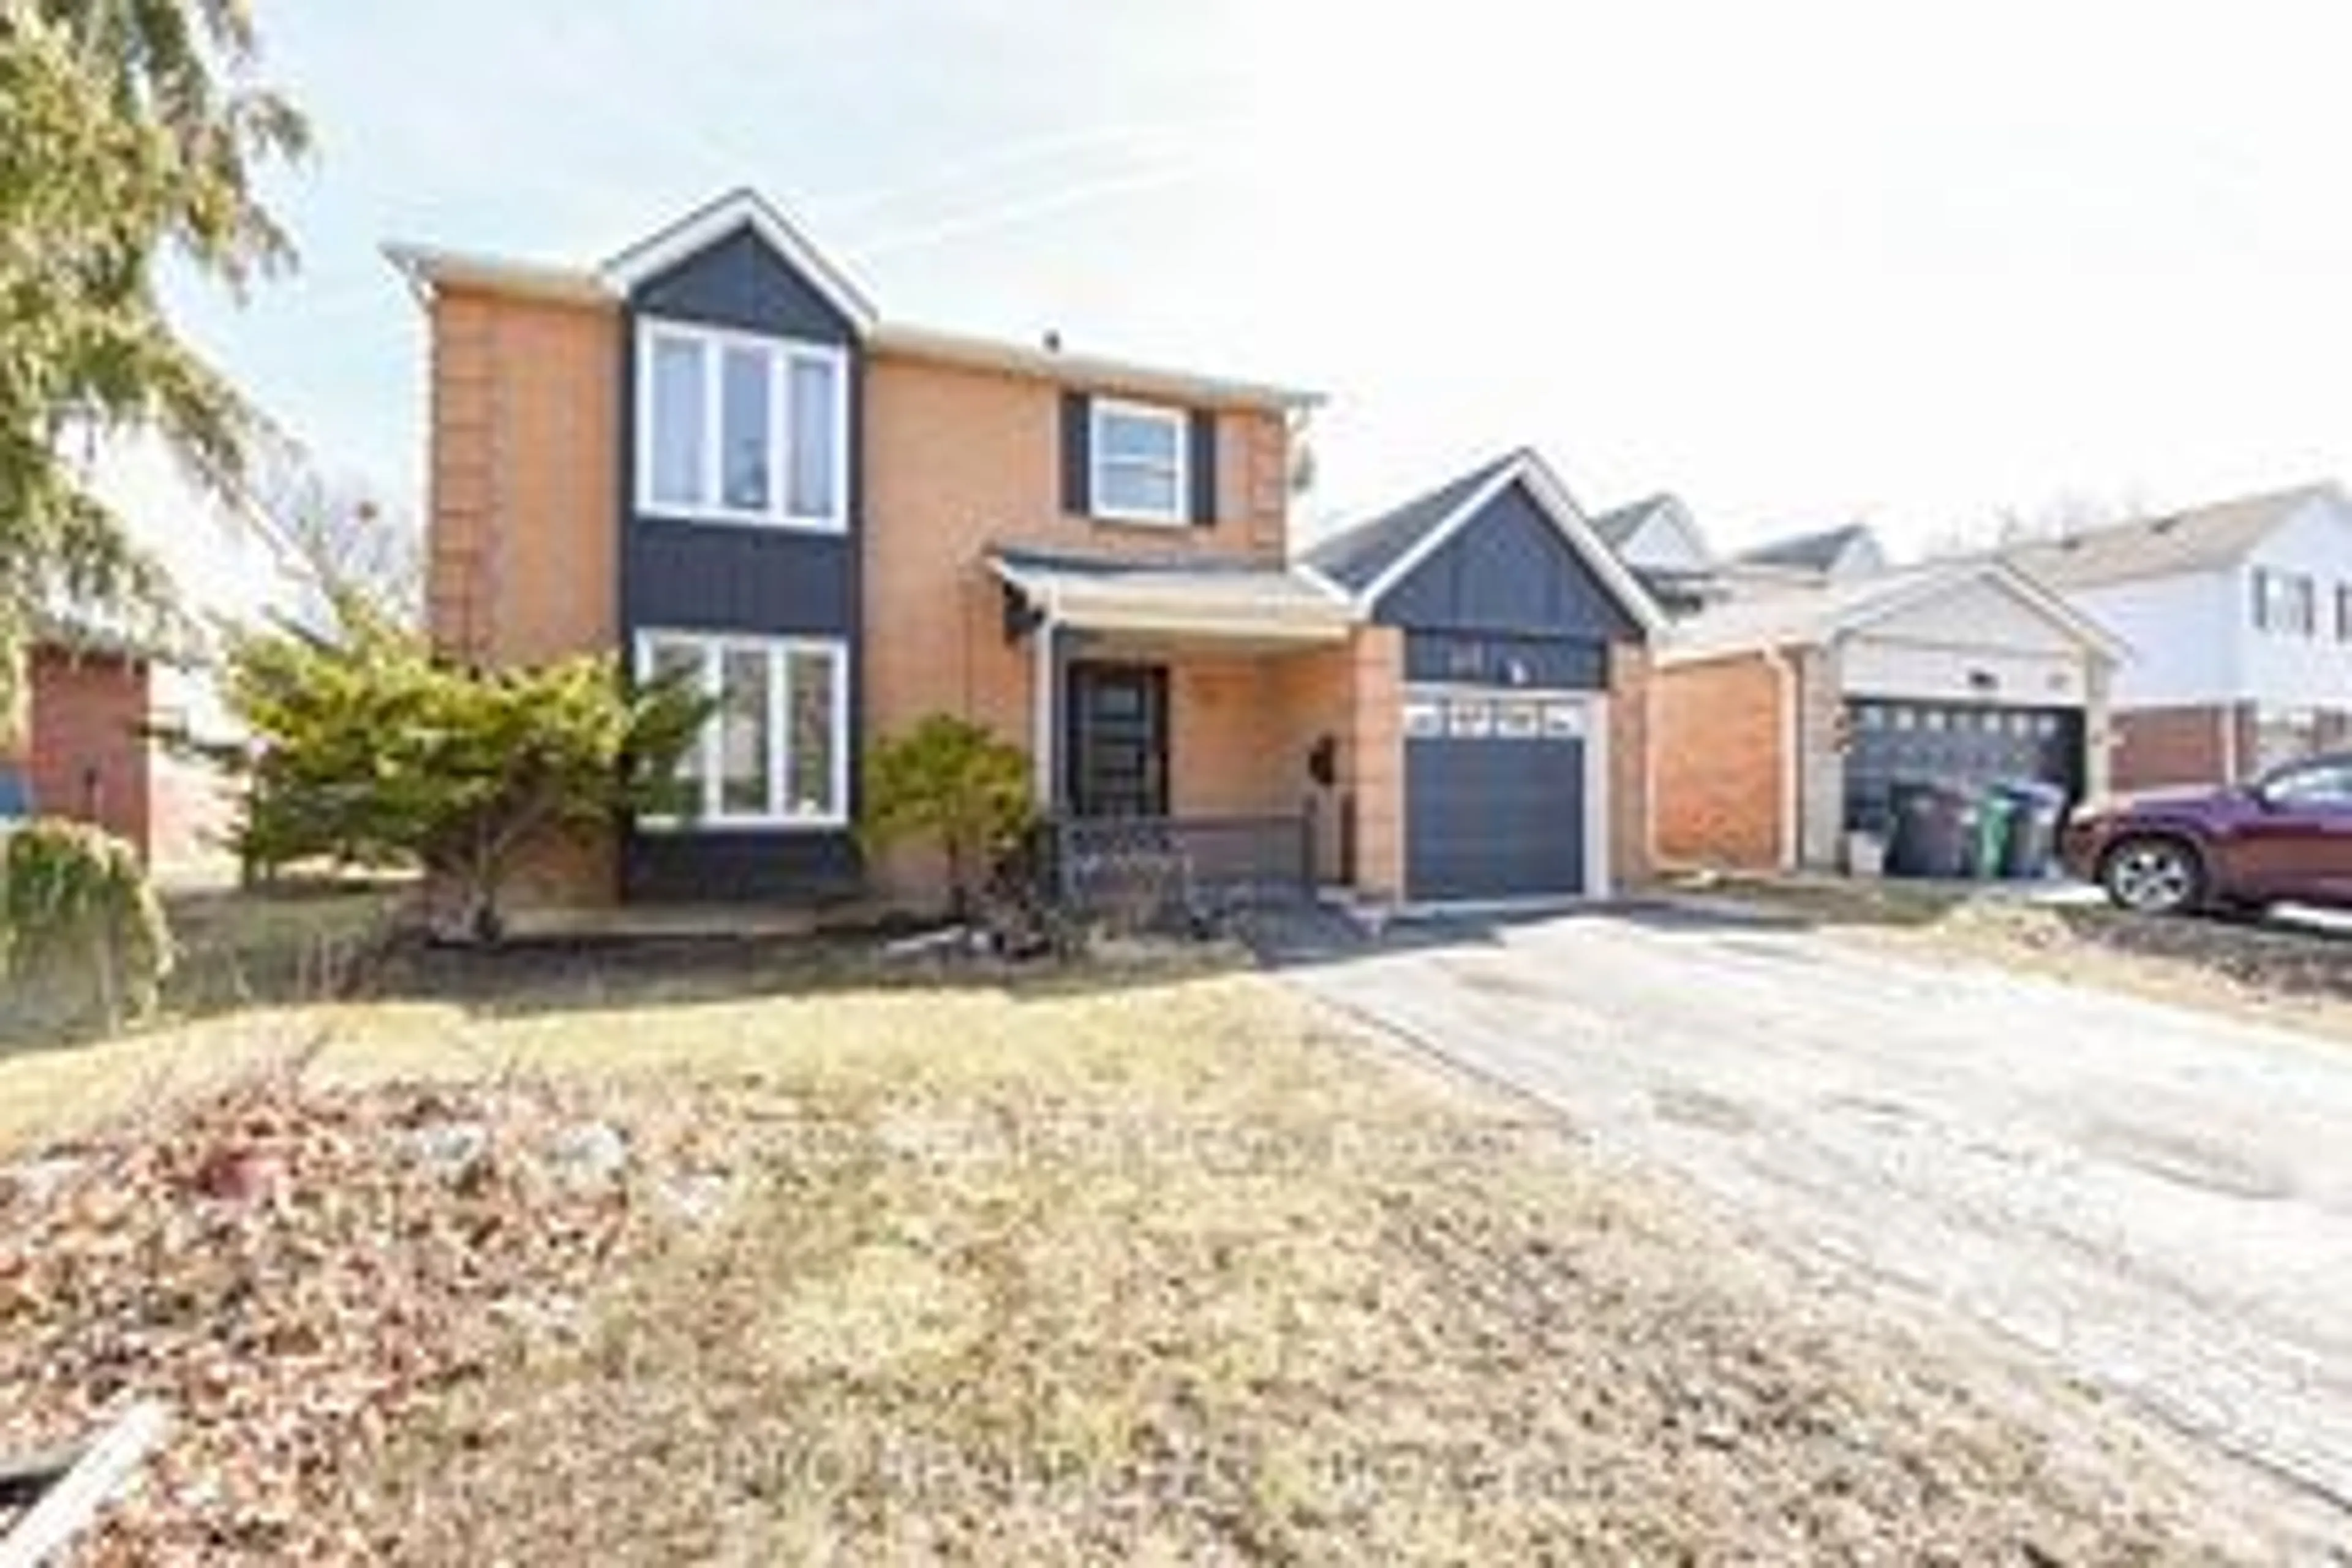 Home with brick exterior material for 68 Jill Cres, Brampton Ontario L6S 3J2